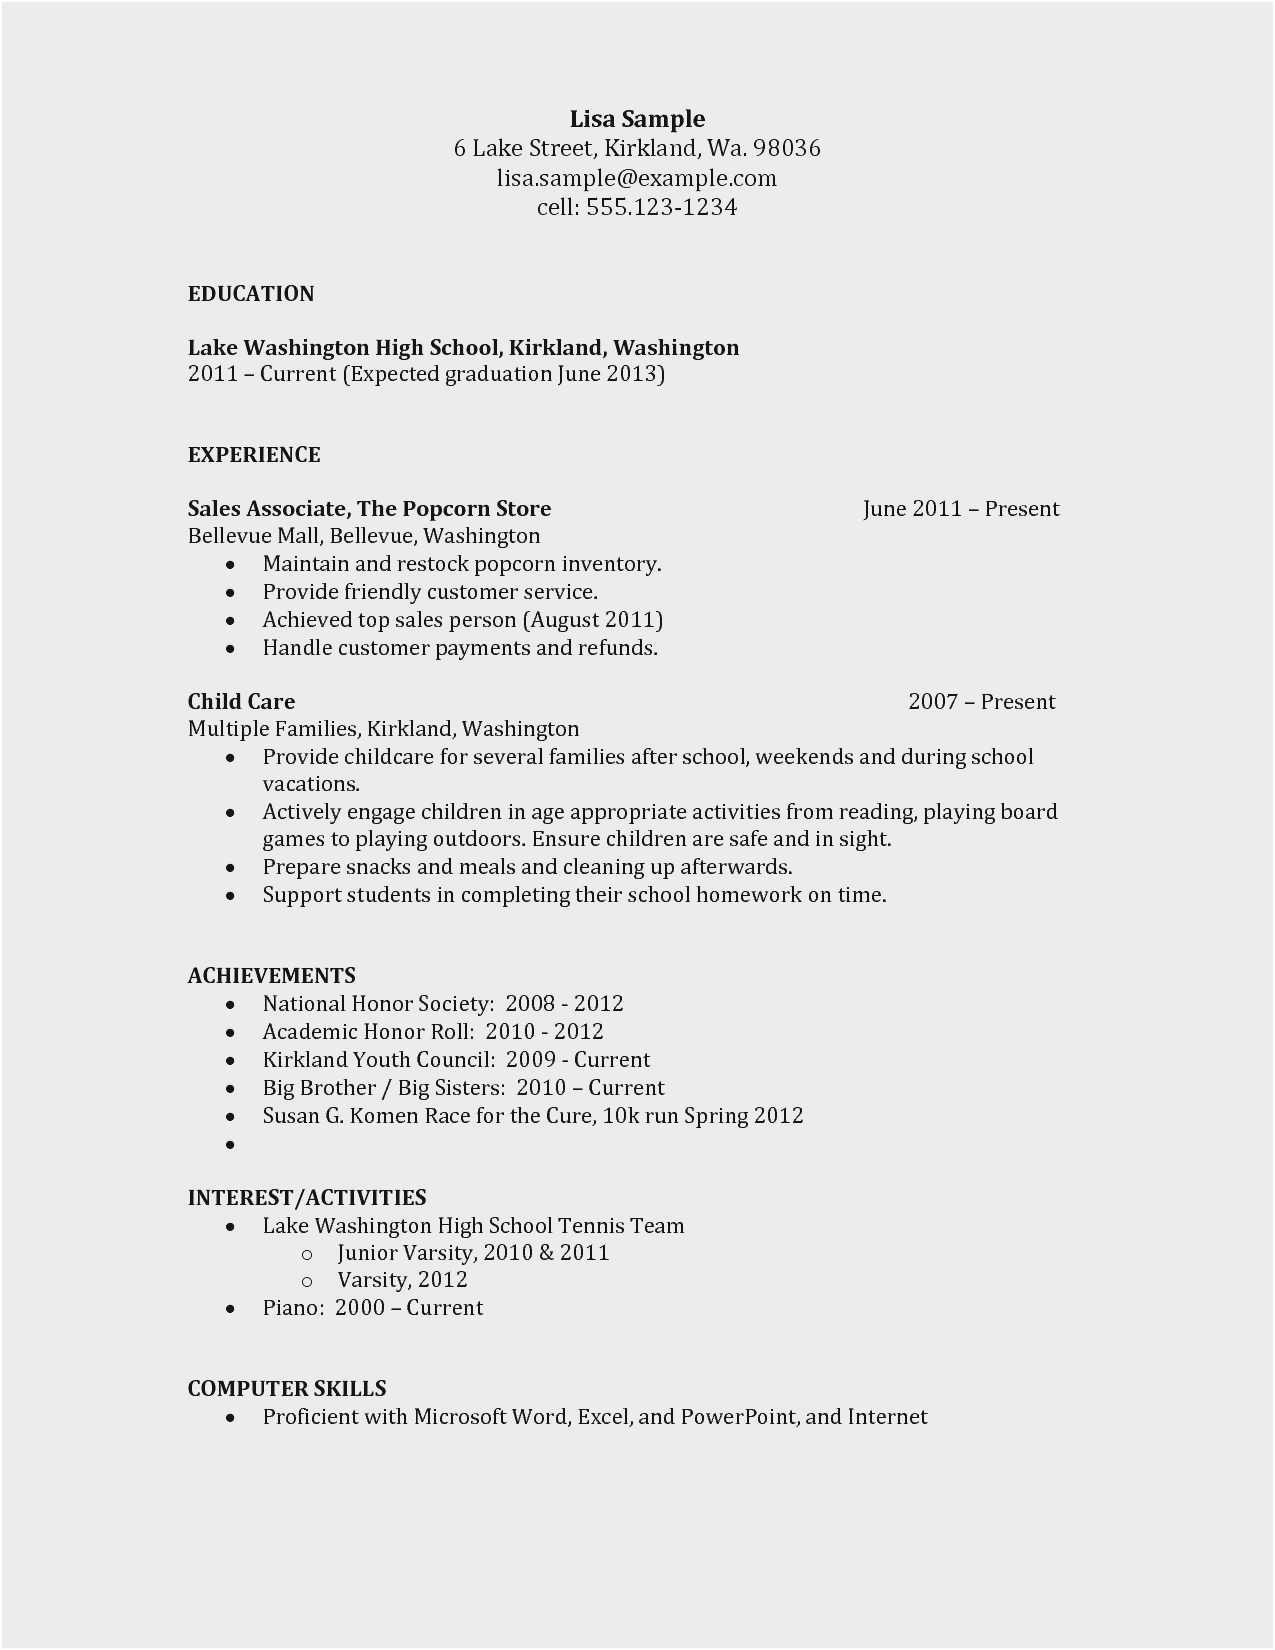 Sample Resume for High School Graduate with Little Experience Sample Resume for High School Graduate Free 48 Models